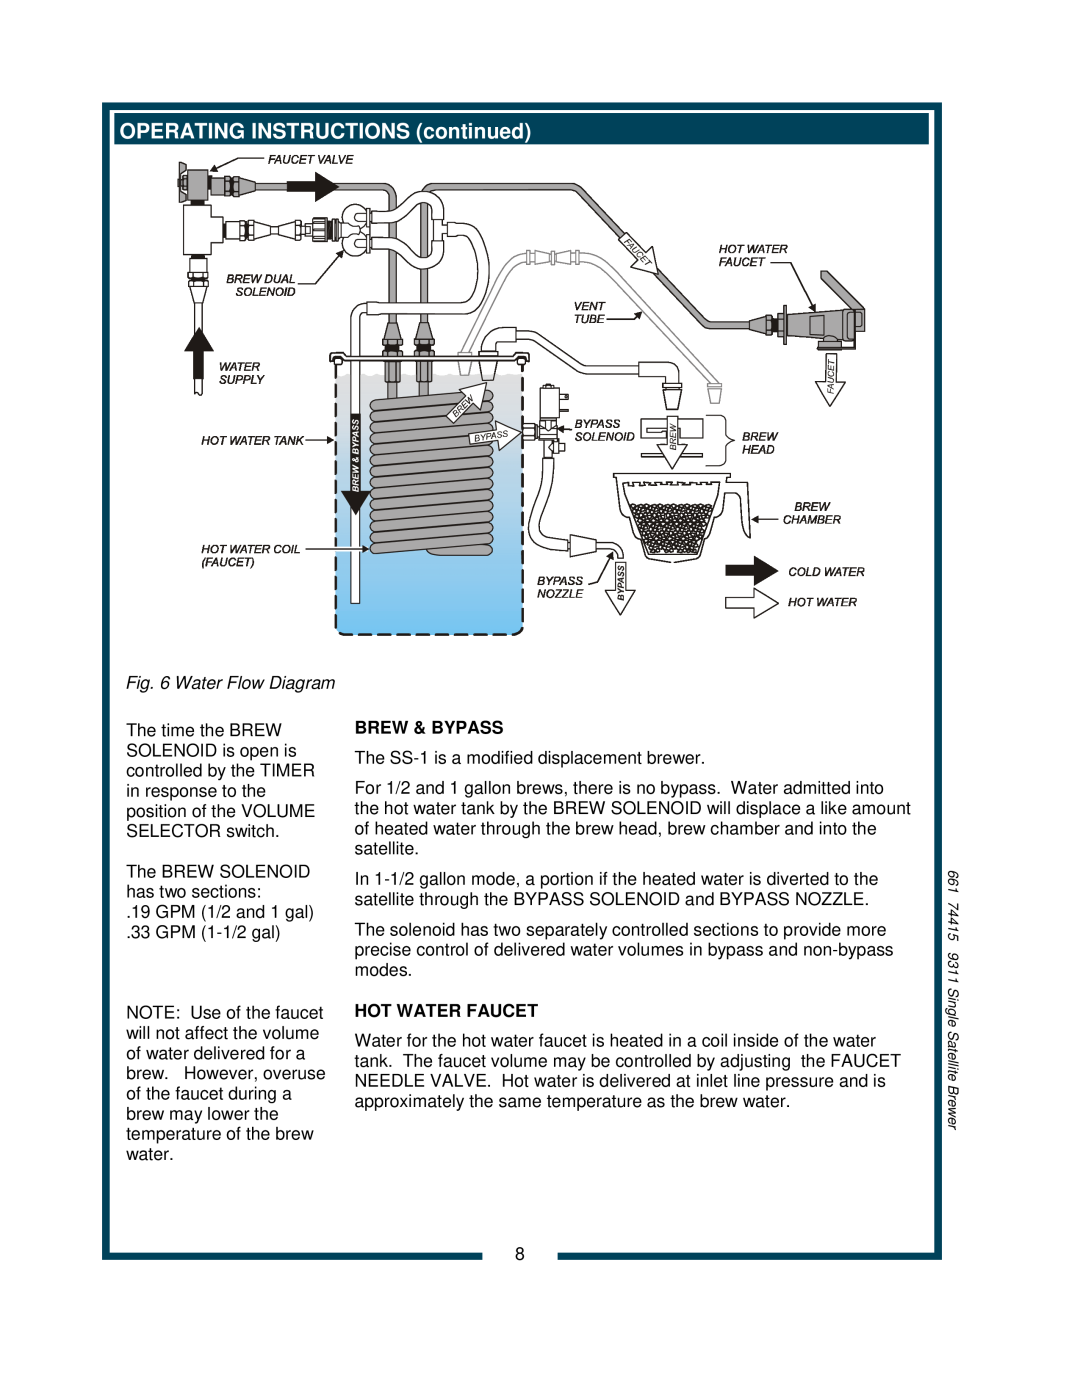 Bloomfield 9311 owner manual OPERATING INSTRUCTIONS continued, Water Flow Diagram, Brew & Bypass, Hot Water Faucet 